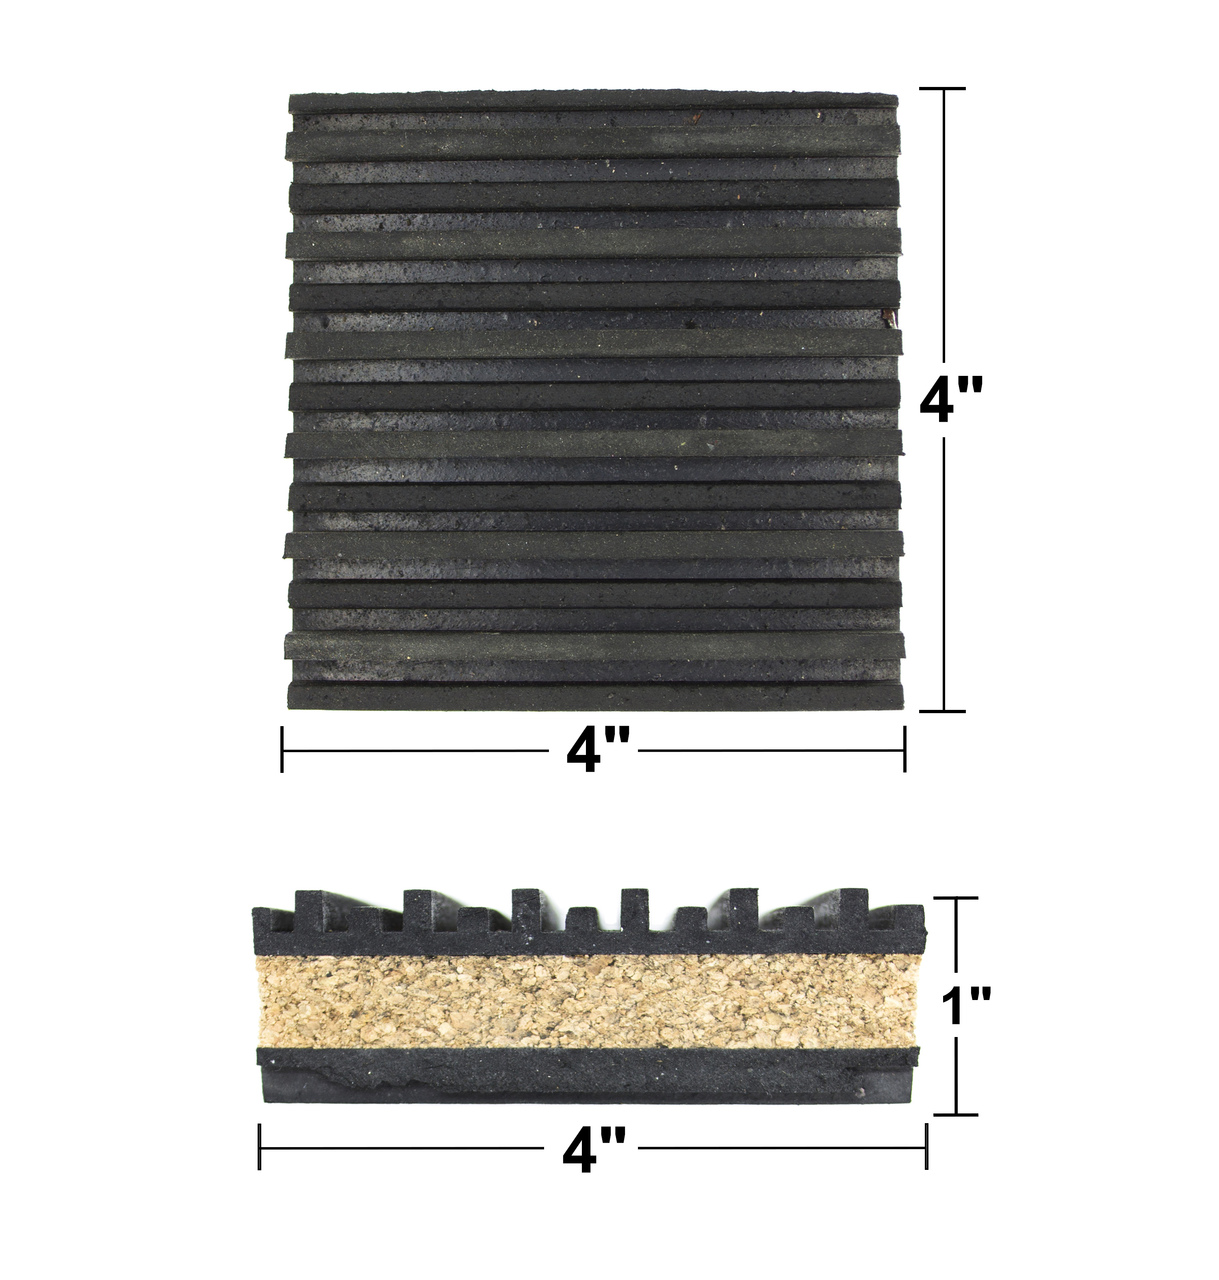 ANTI VIBRATION ISOLATION PADS 2 X 2 X 7/8 RIBBED RUBBER WITH CORK CENTER VIBRATION DAMPENING QUANTITY 4 